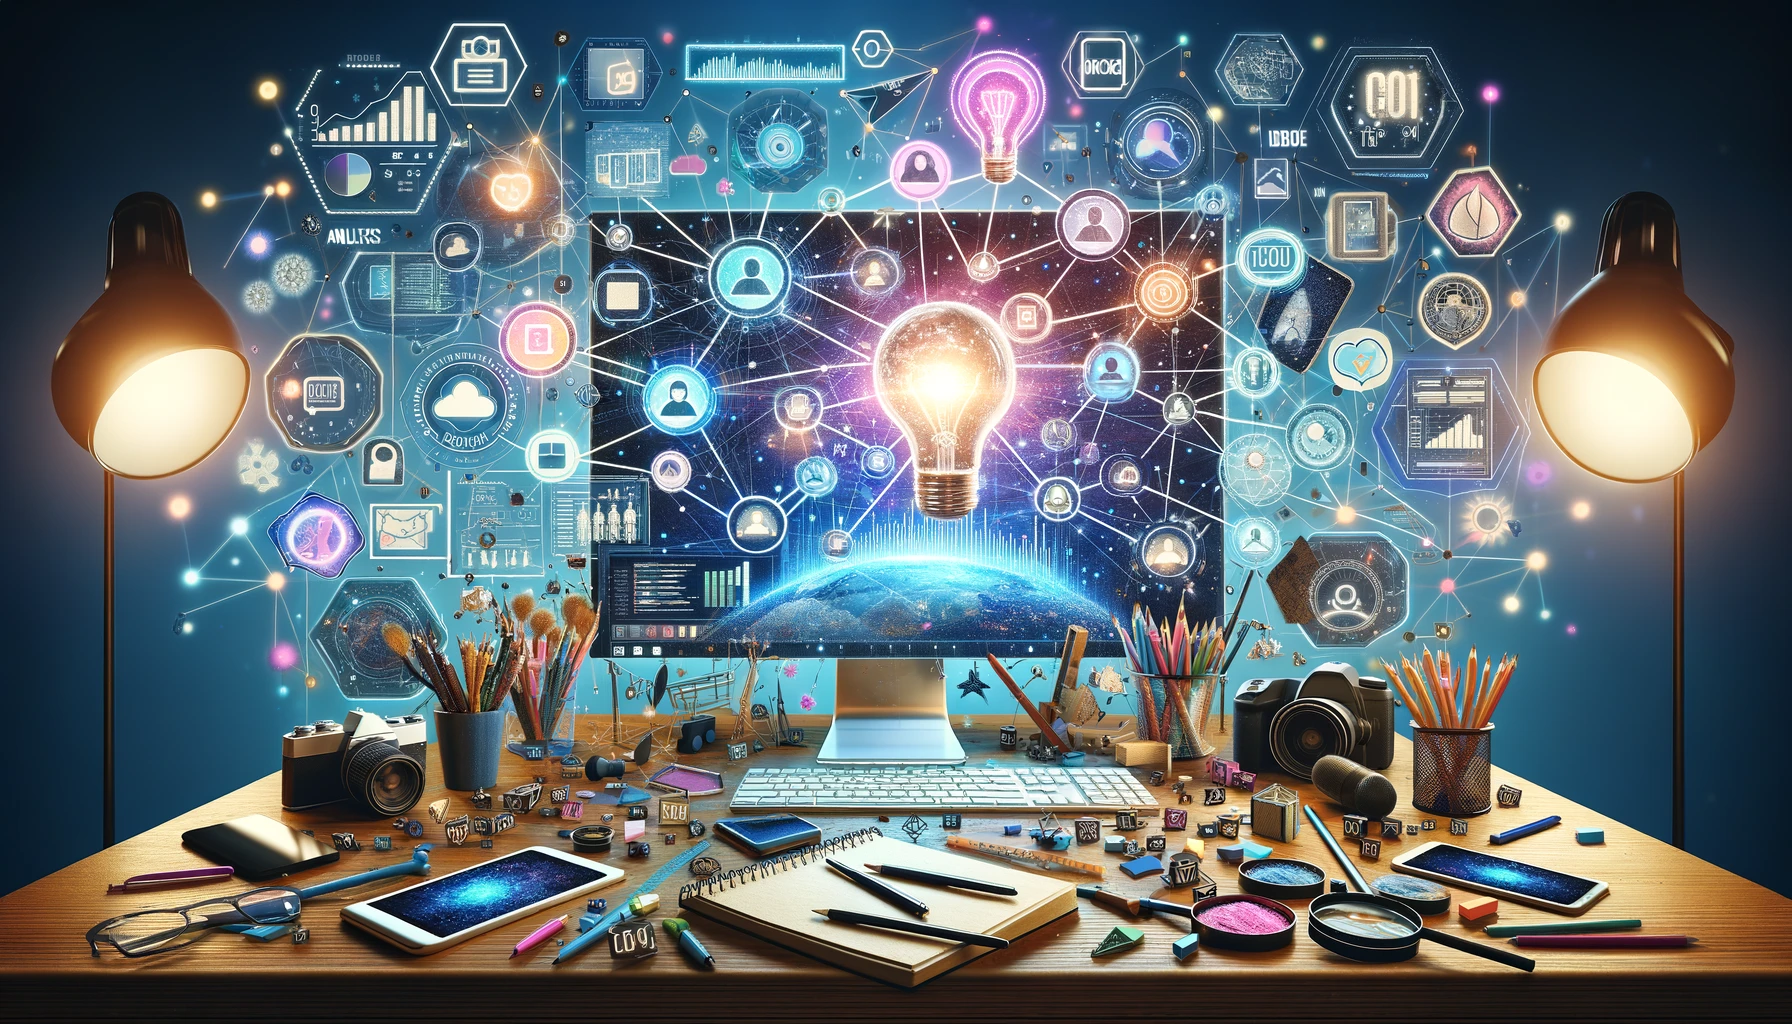 Image depicting 'Influencer Content Strategy', showing a creative workspace with a digital screen displaying social media analytics, surrounded by content creation tools and symbolic elements of strategy and collaboration.